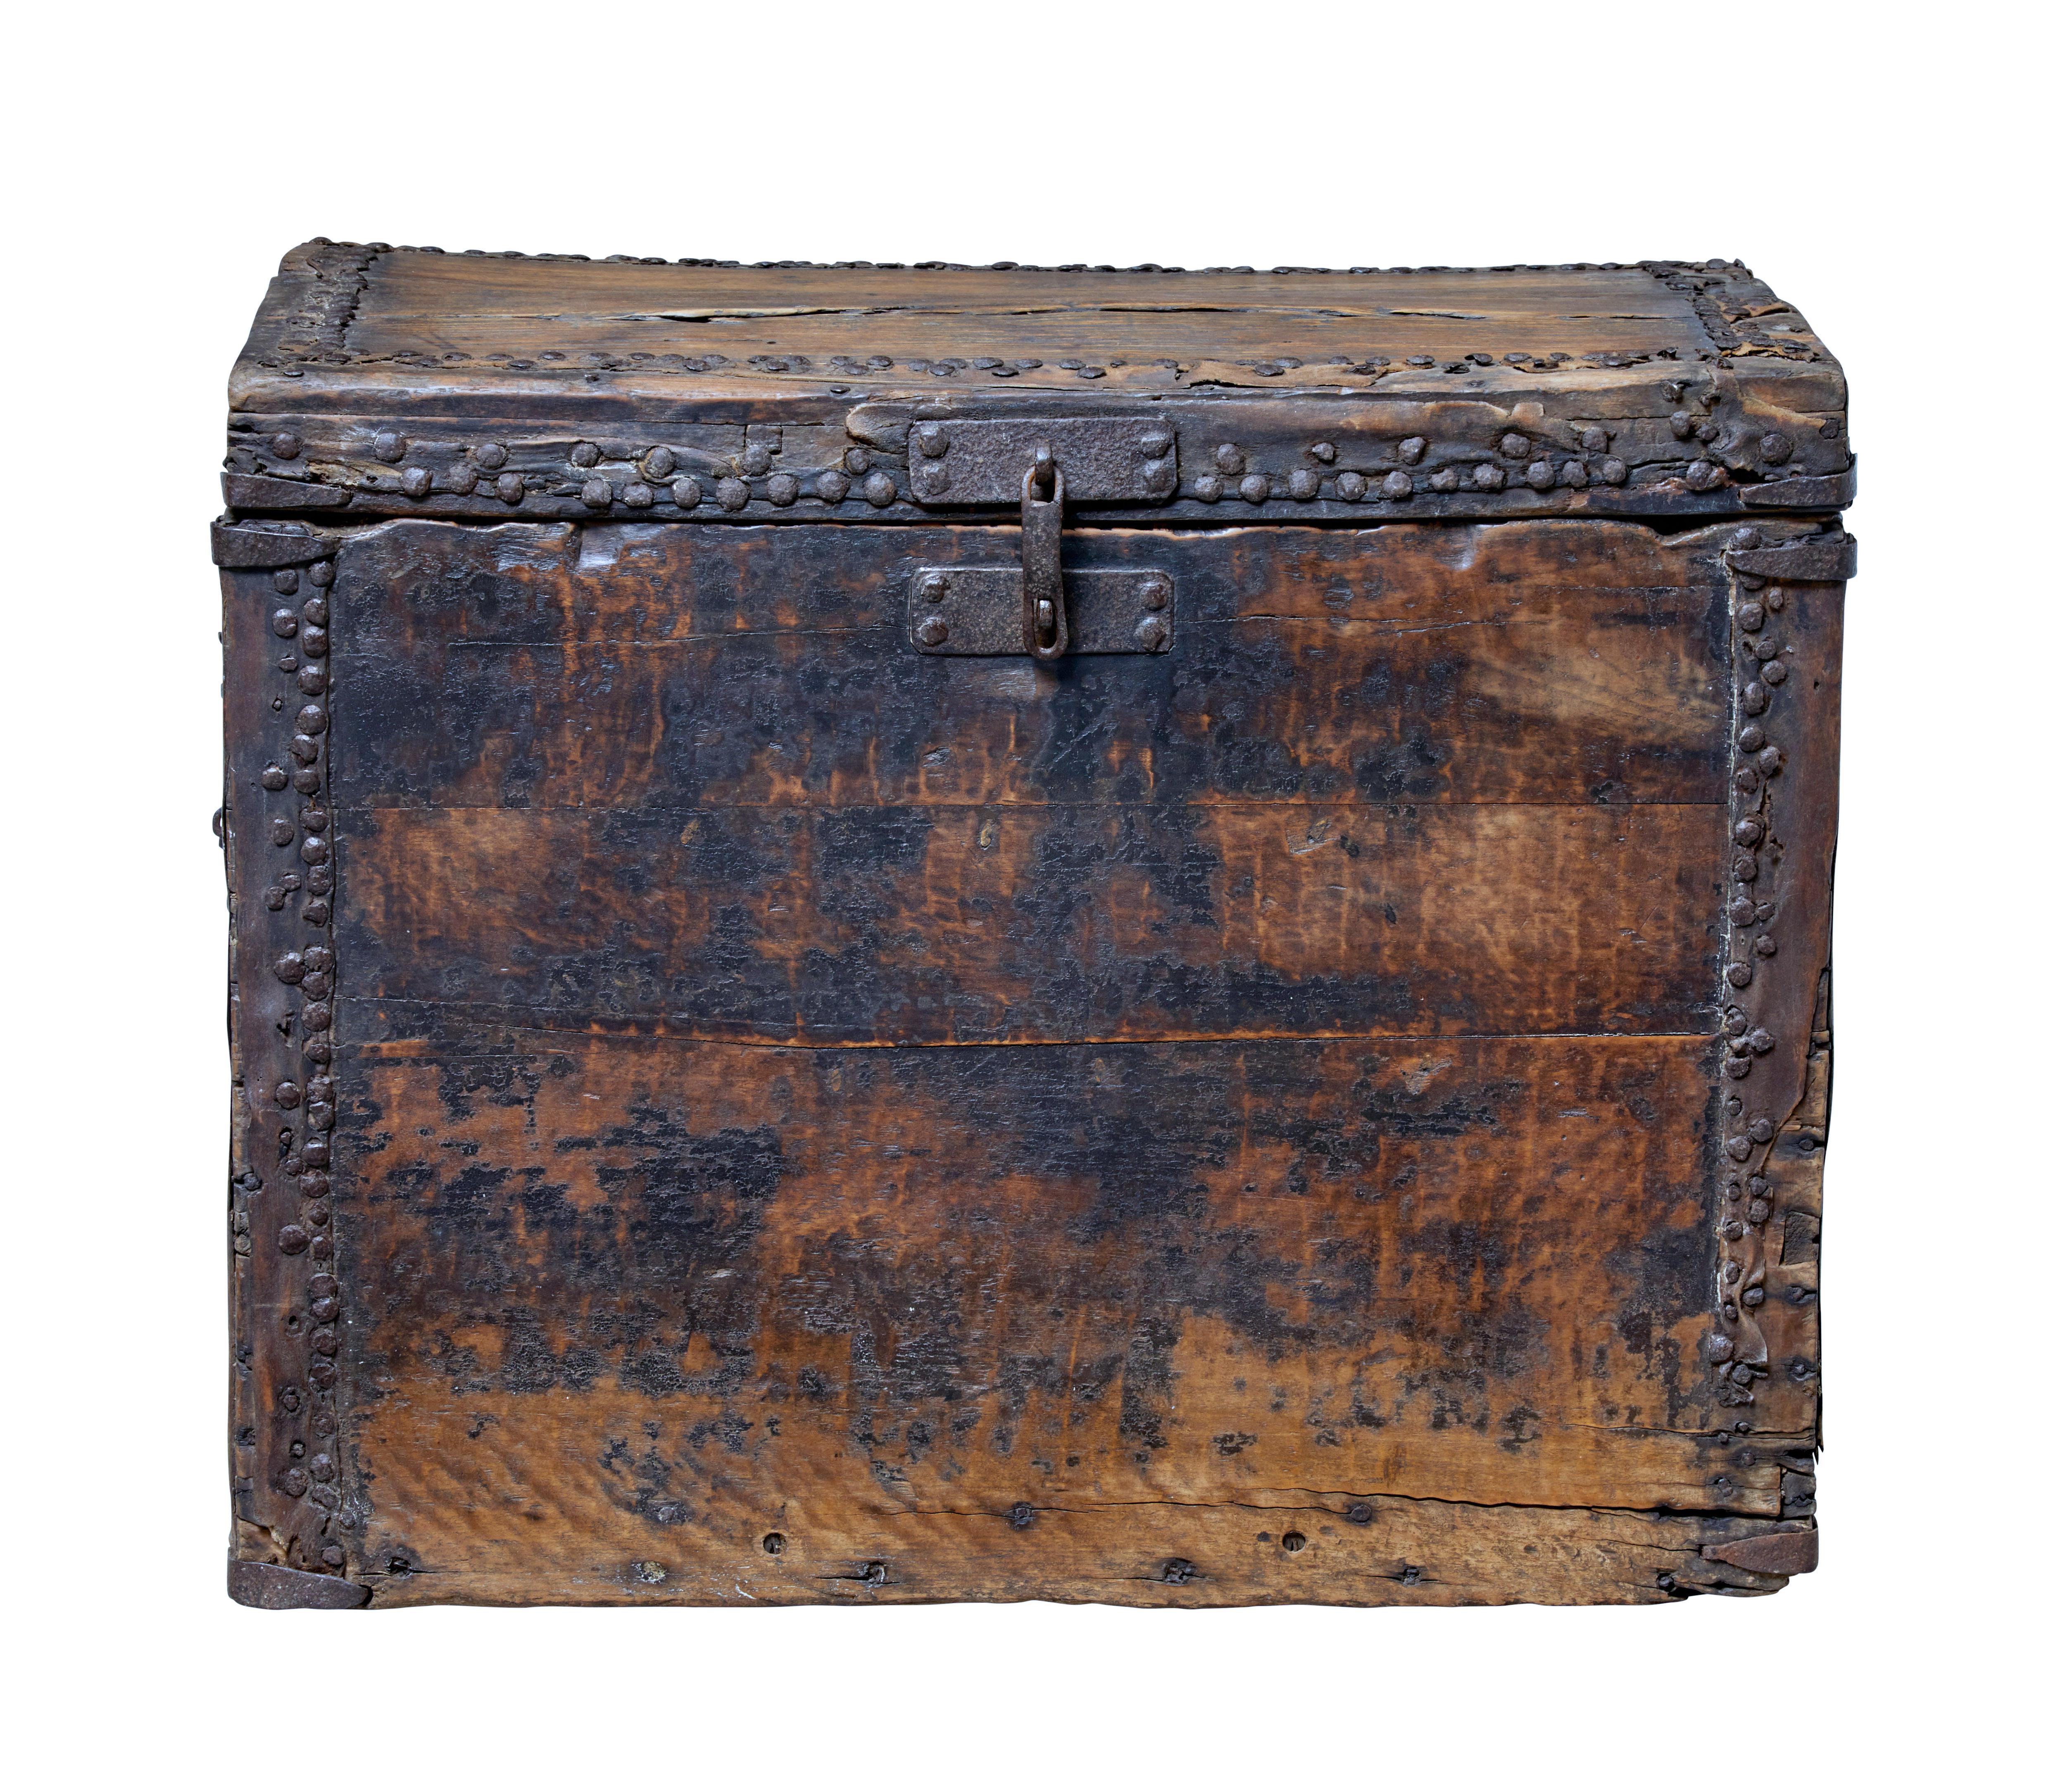 Rare 18th century perhaps earlier hard wood coffer.

Presented in original unrestored condition. Original handles and metal work to outer edges.

Lid opens on ringed handles which are a little vague when closing.

Expected losses and wear.